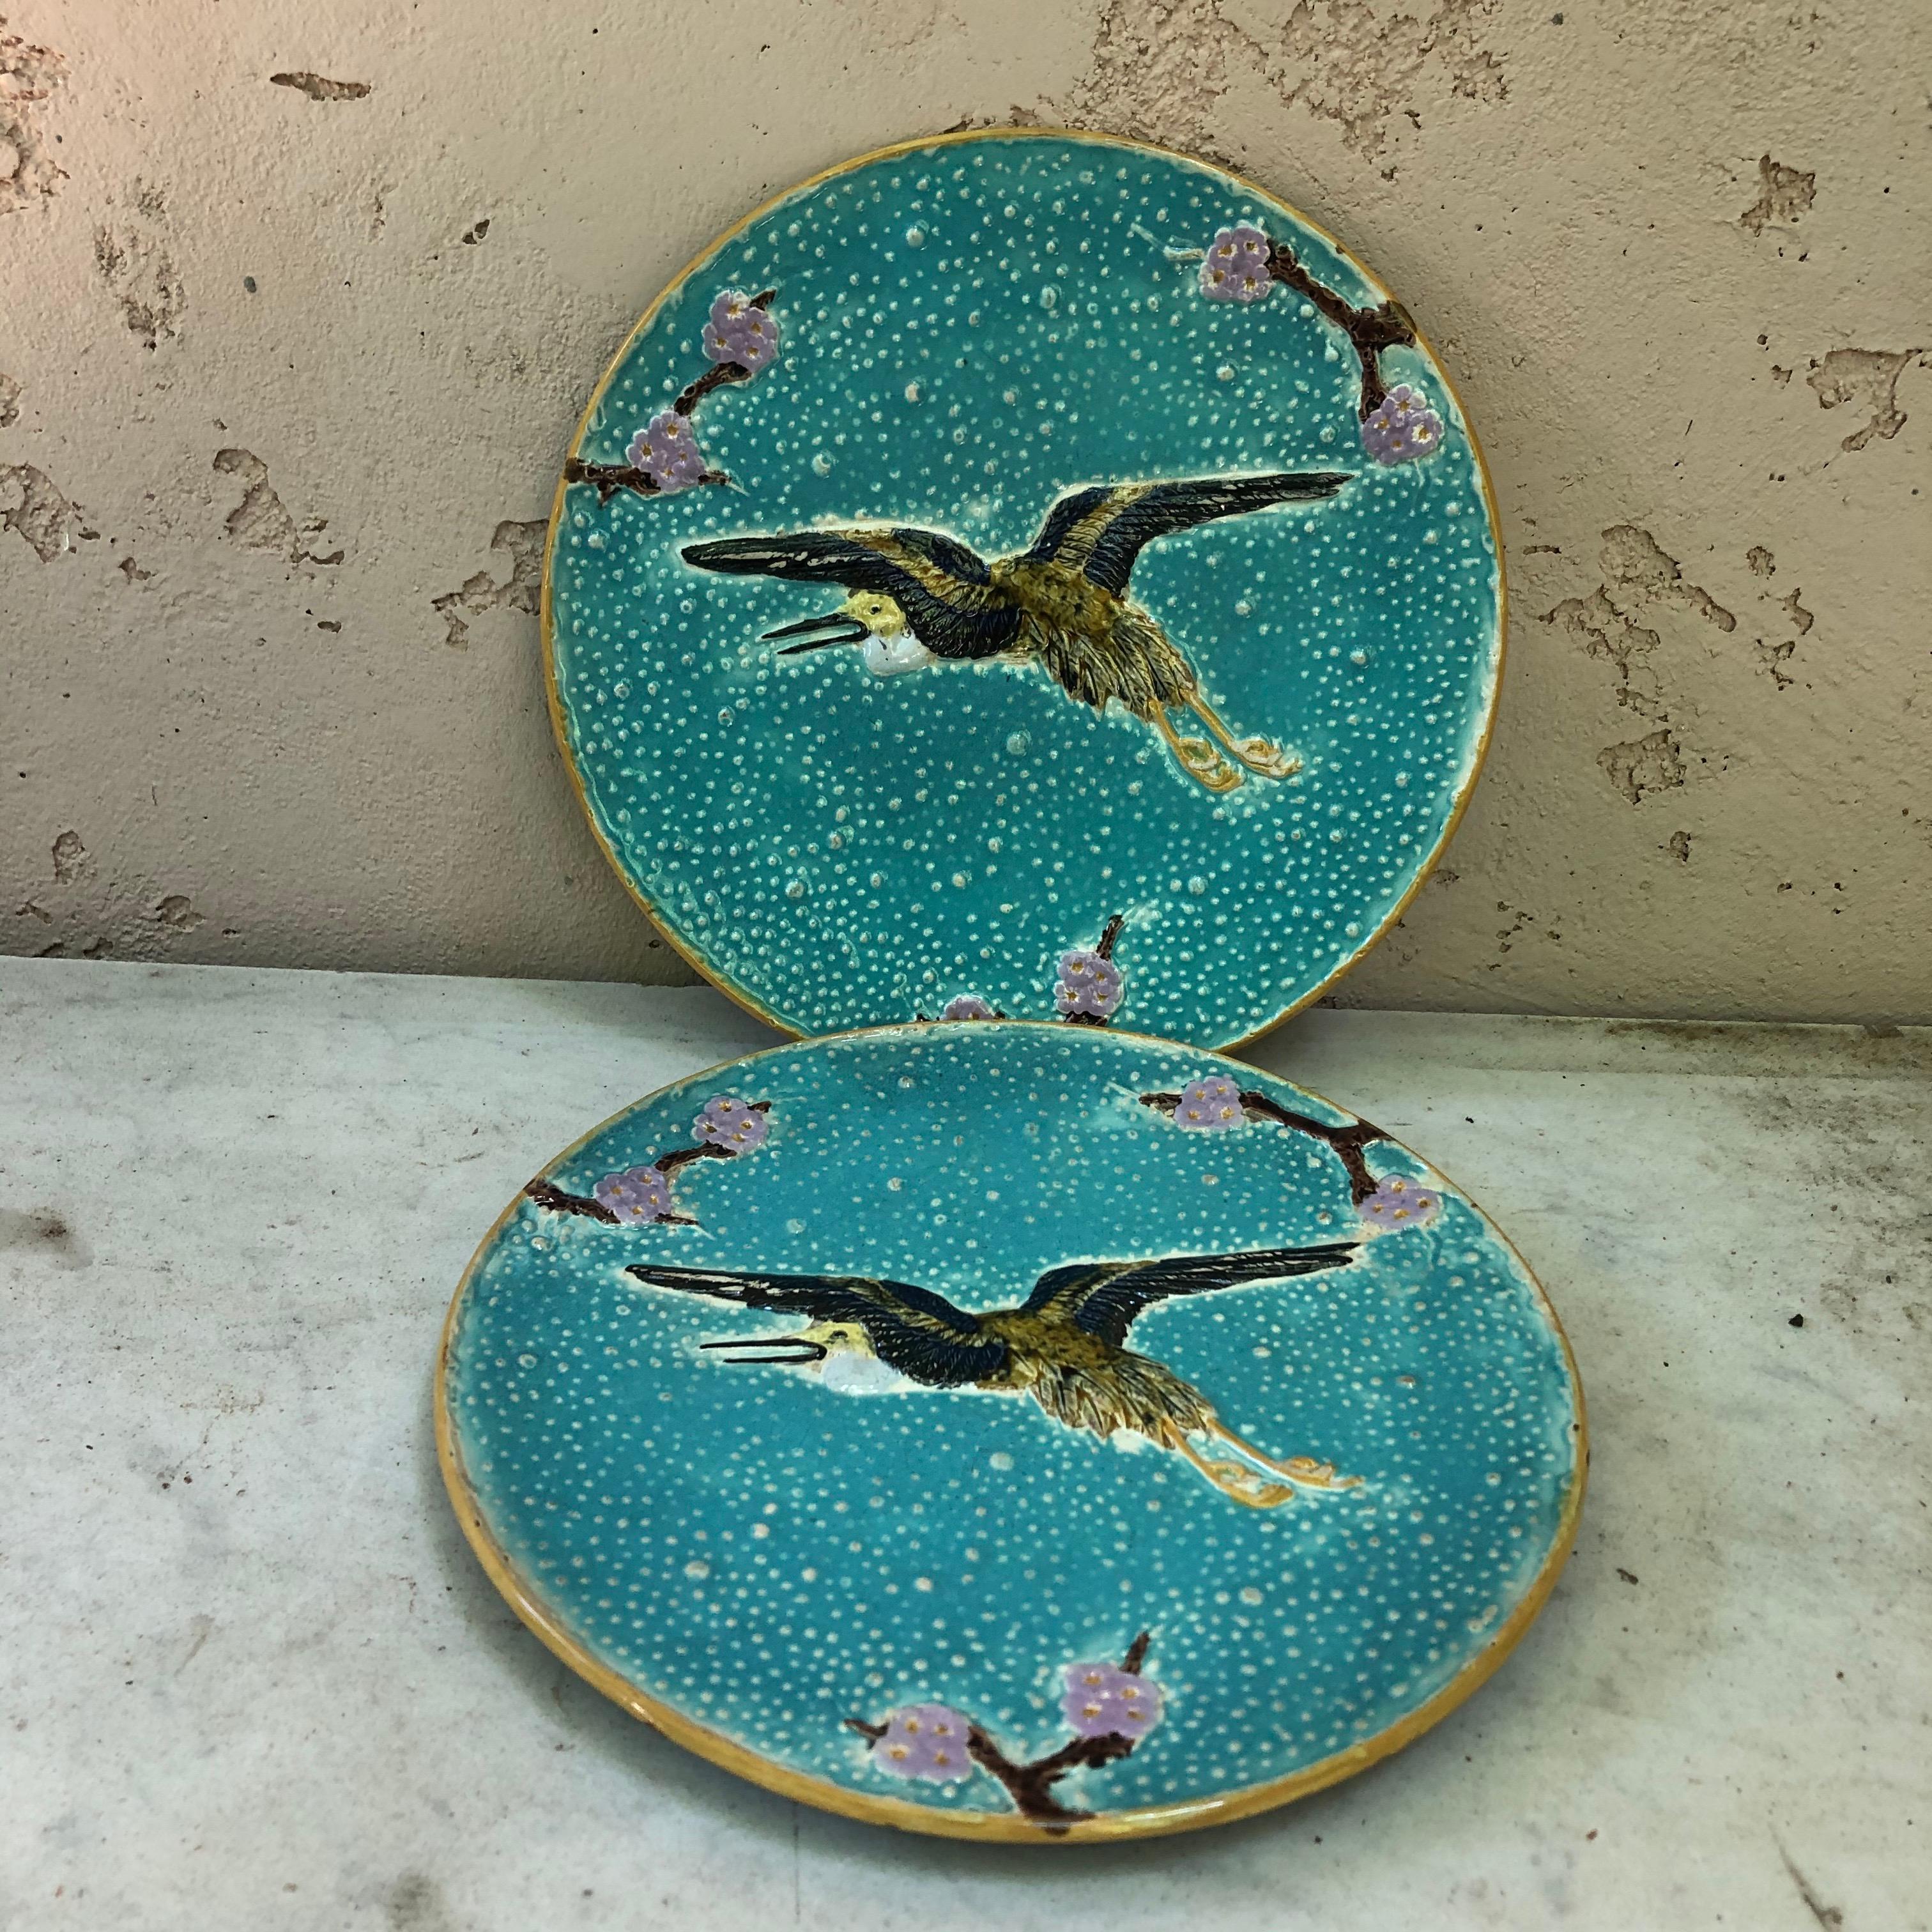 19th century Majolica plate with crane flying signed Joseph Holcroft.